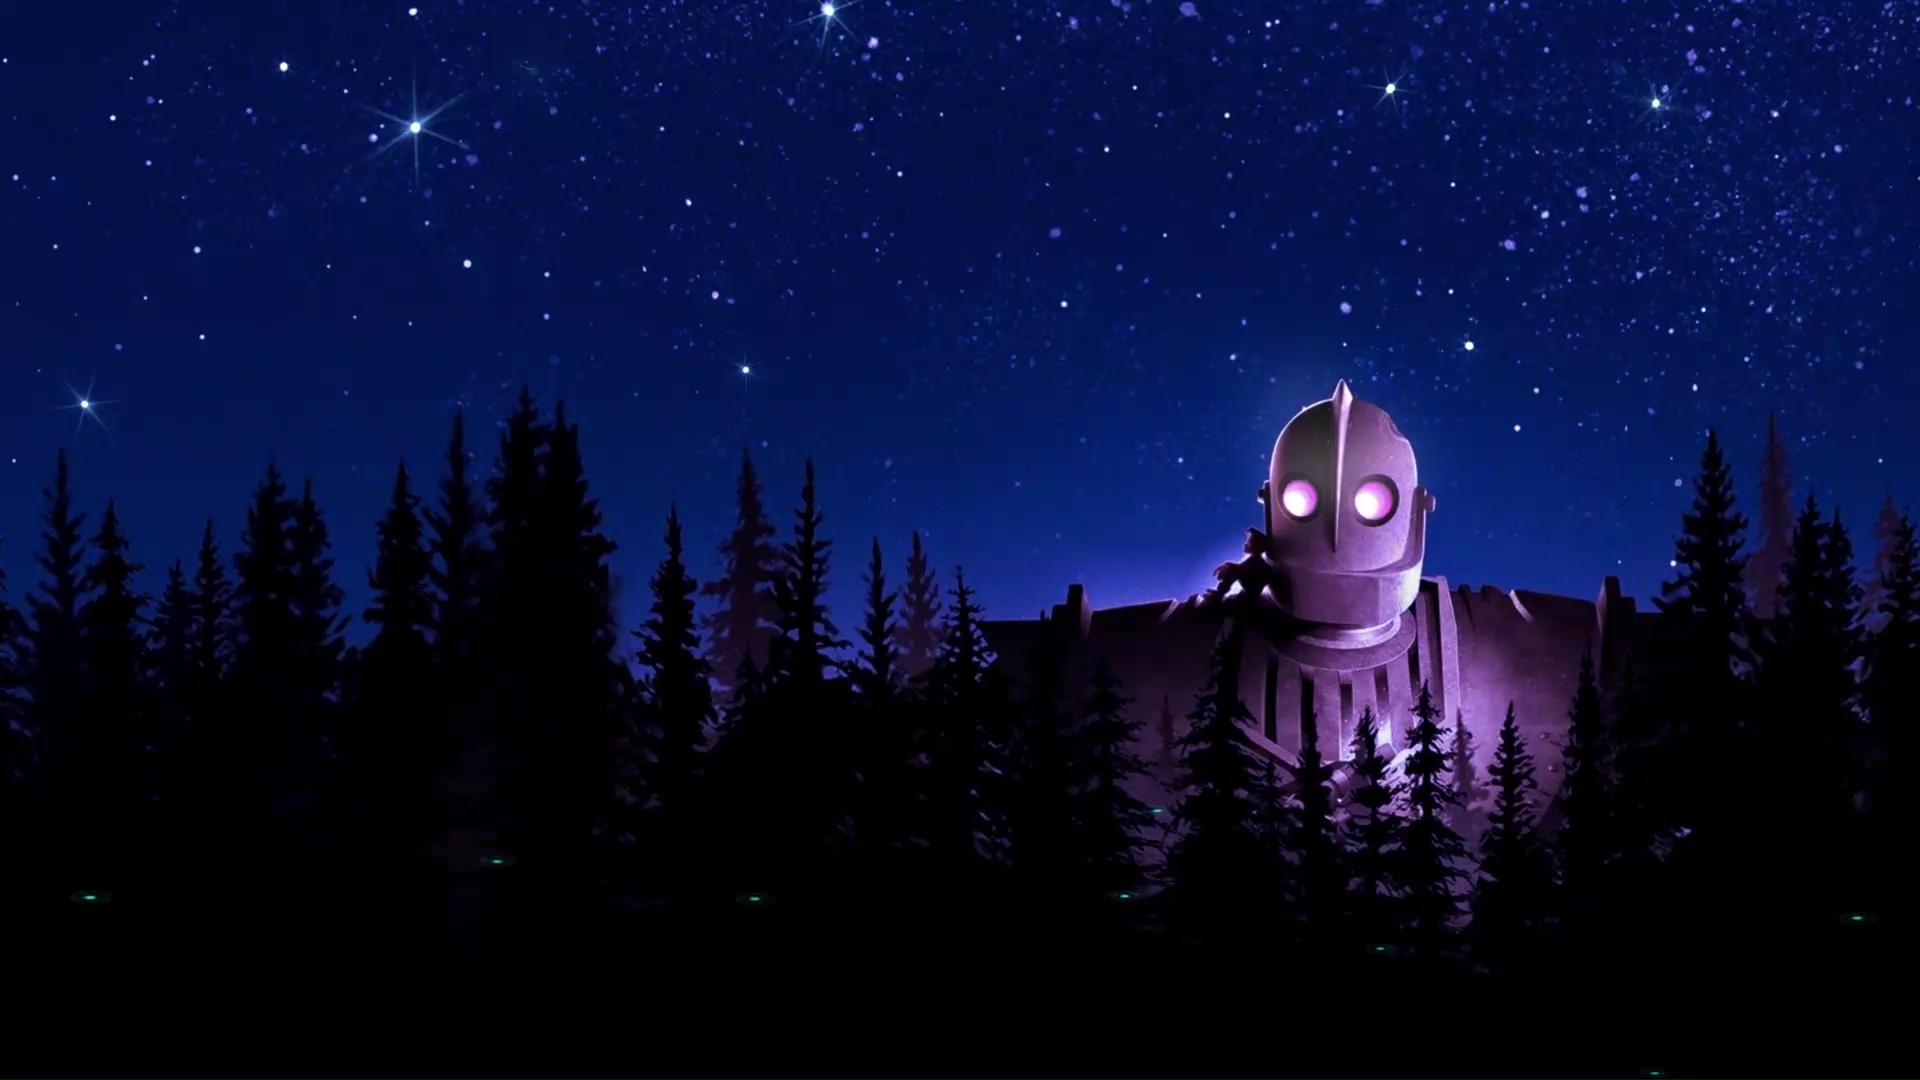 The Iron Giant 1080P 2K 4K 5K HD wallpapers free download  Wallpaper  Flare